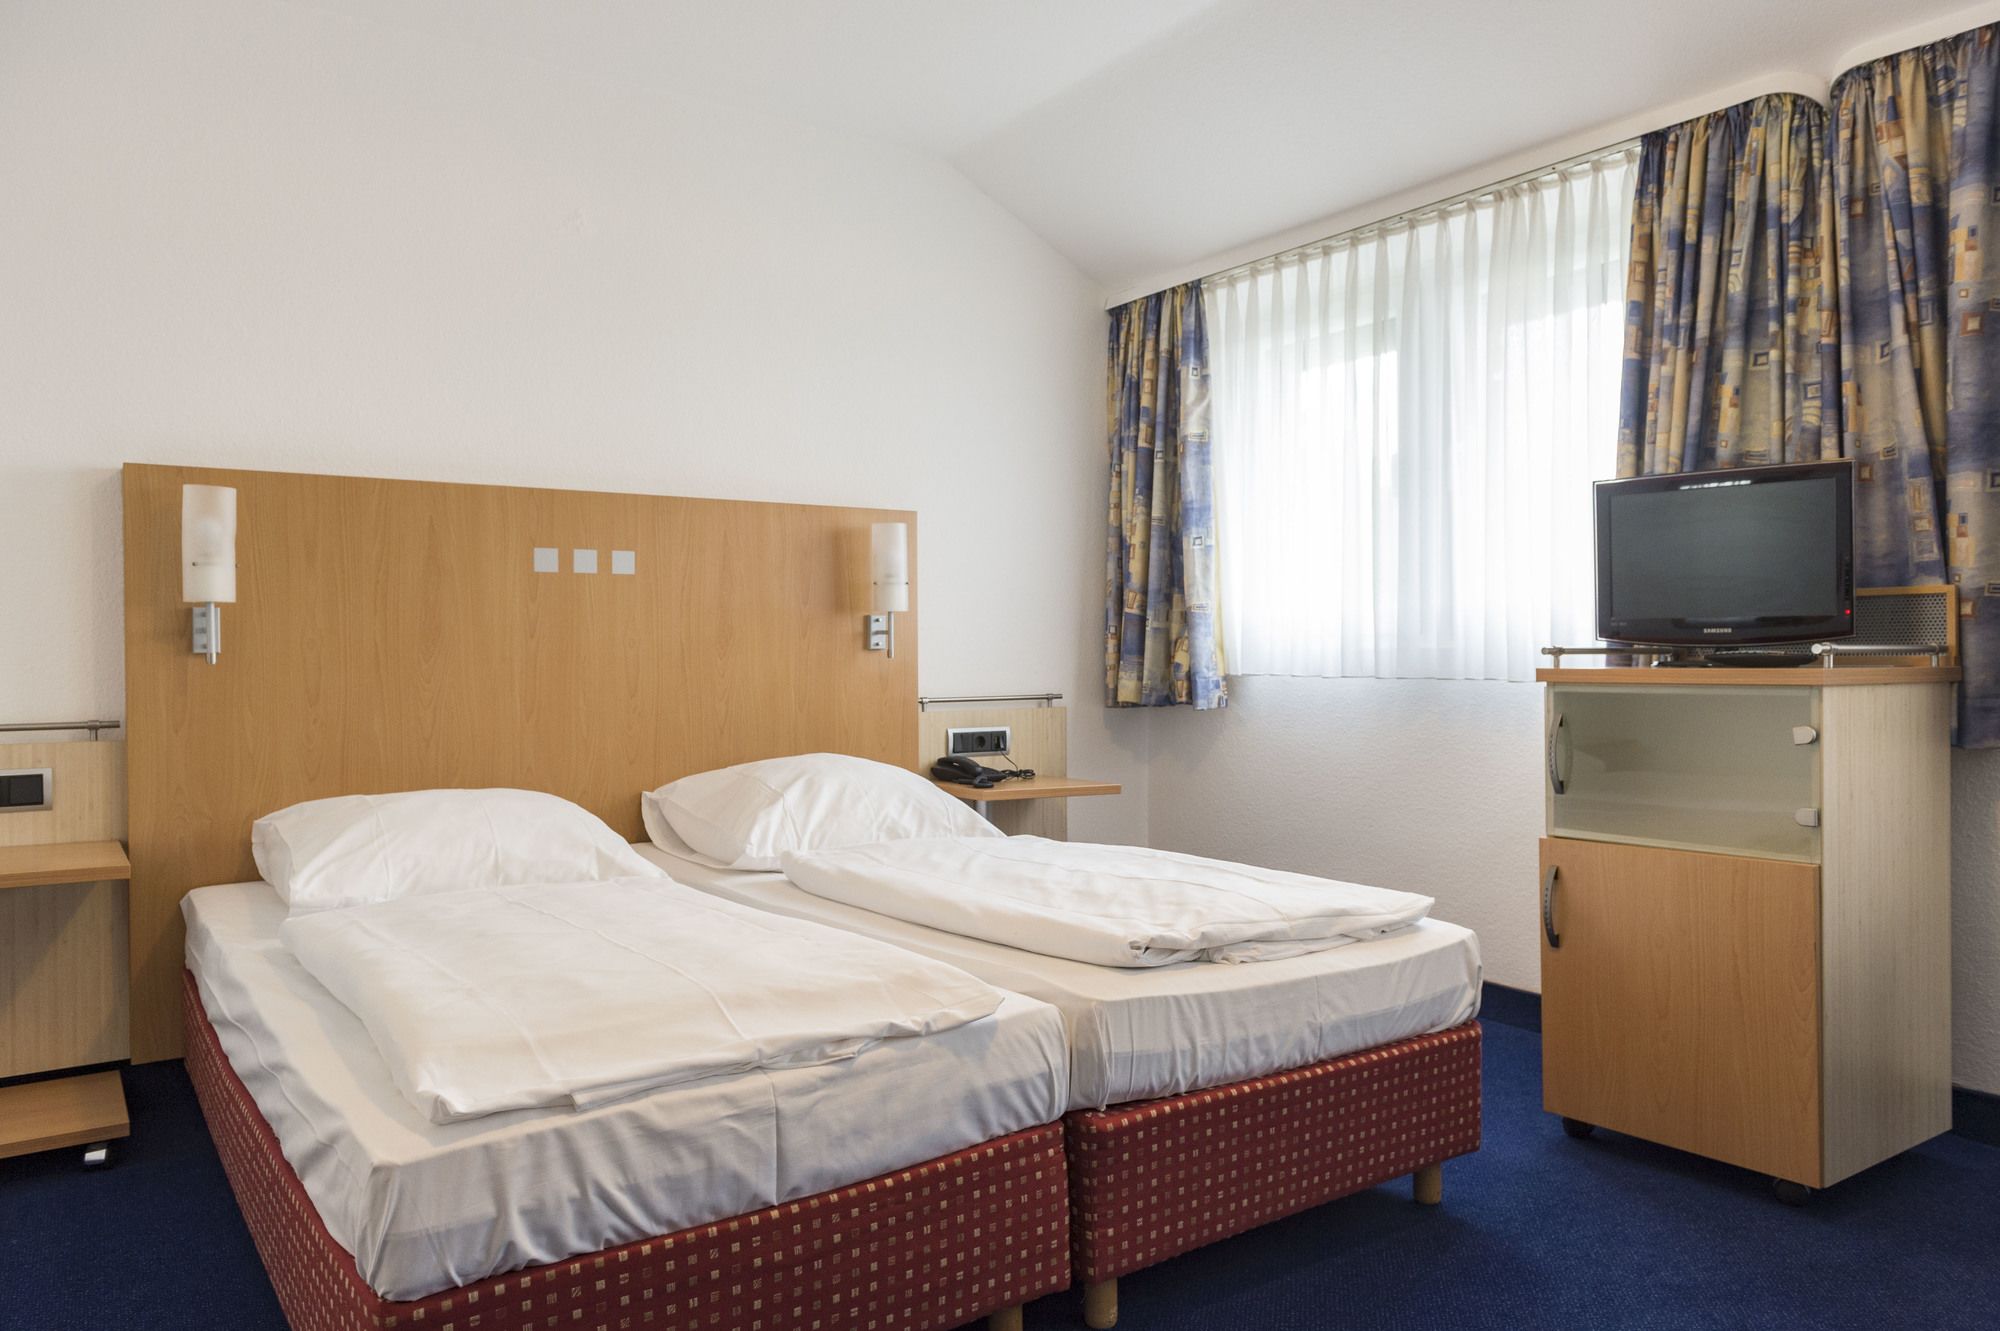 Sure Hotel by Best Western Ratingen <br/>50.00 ew <br/> <a href='http://vakantieoplossing.nl/outpage/?id=2d9809661ae8f19cf81251342ae71856' target='_blank'>View Details</a>